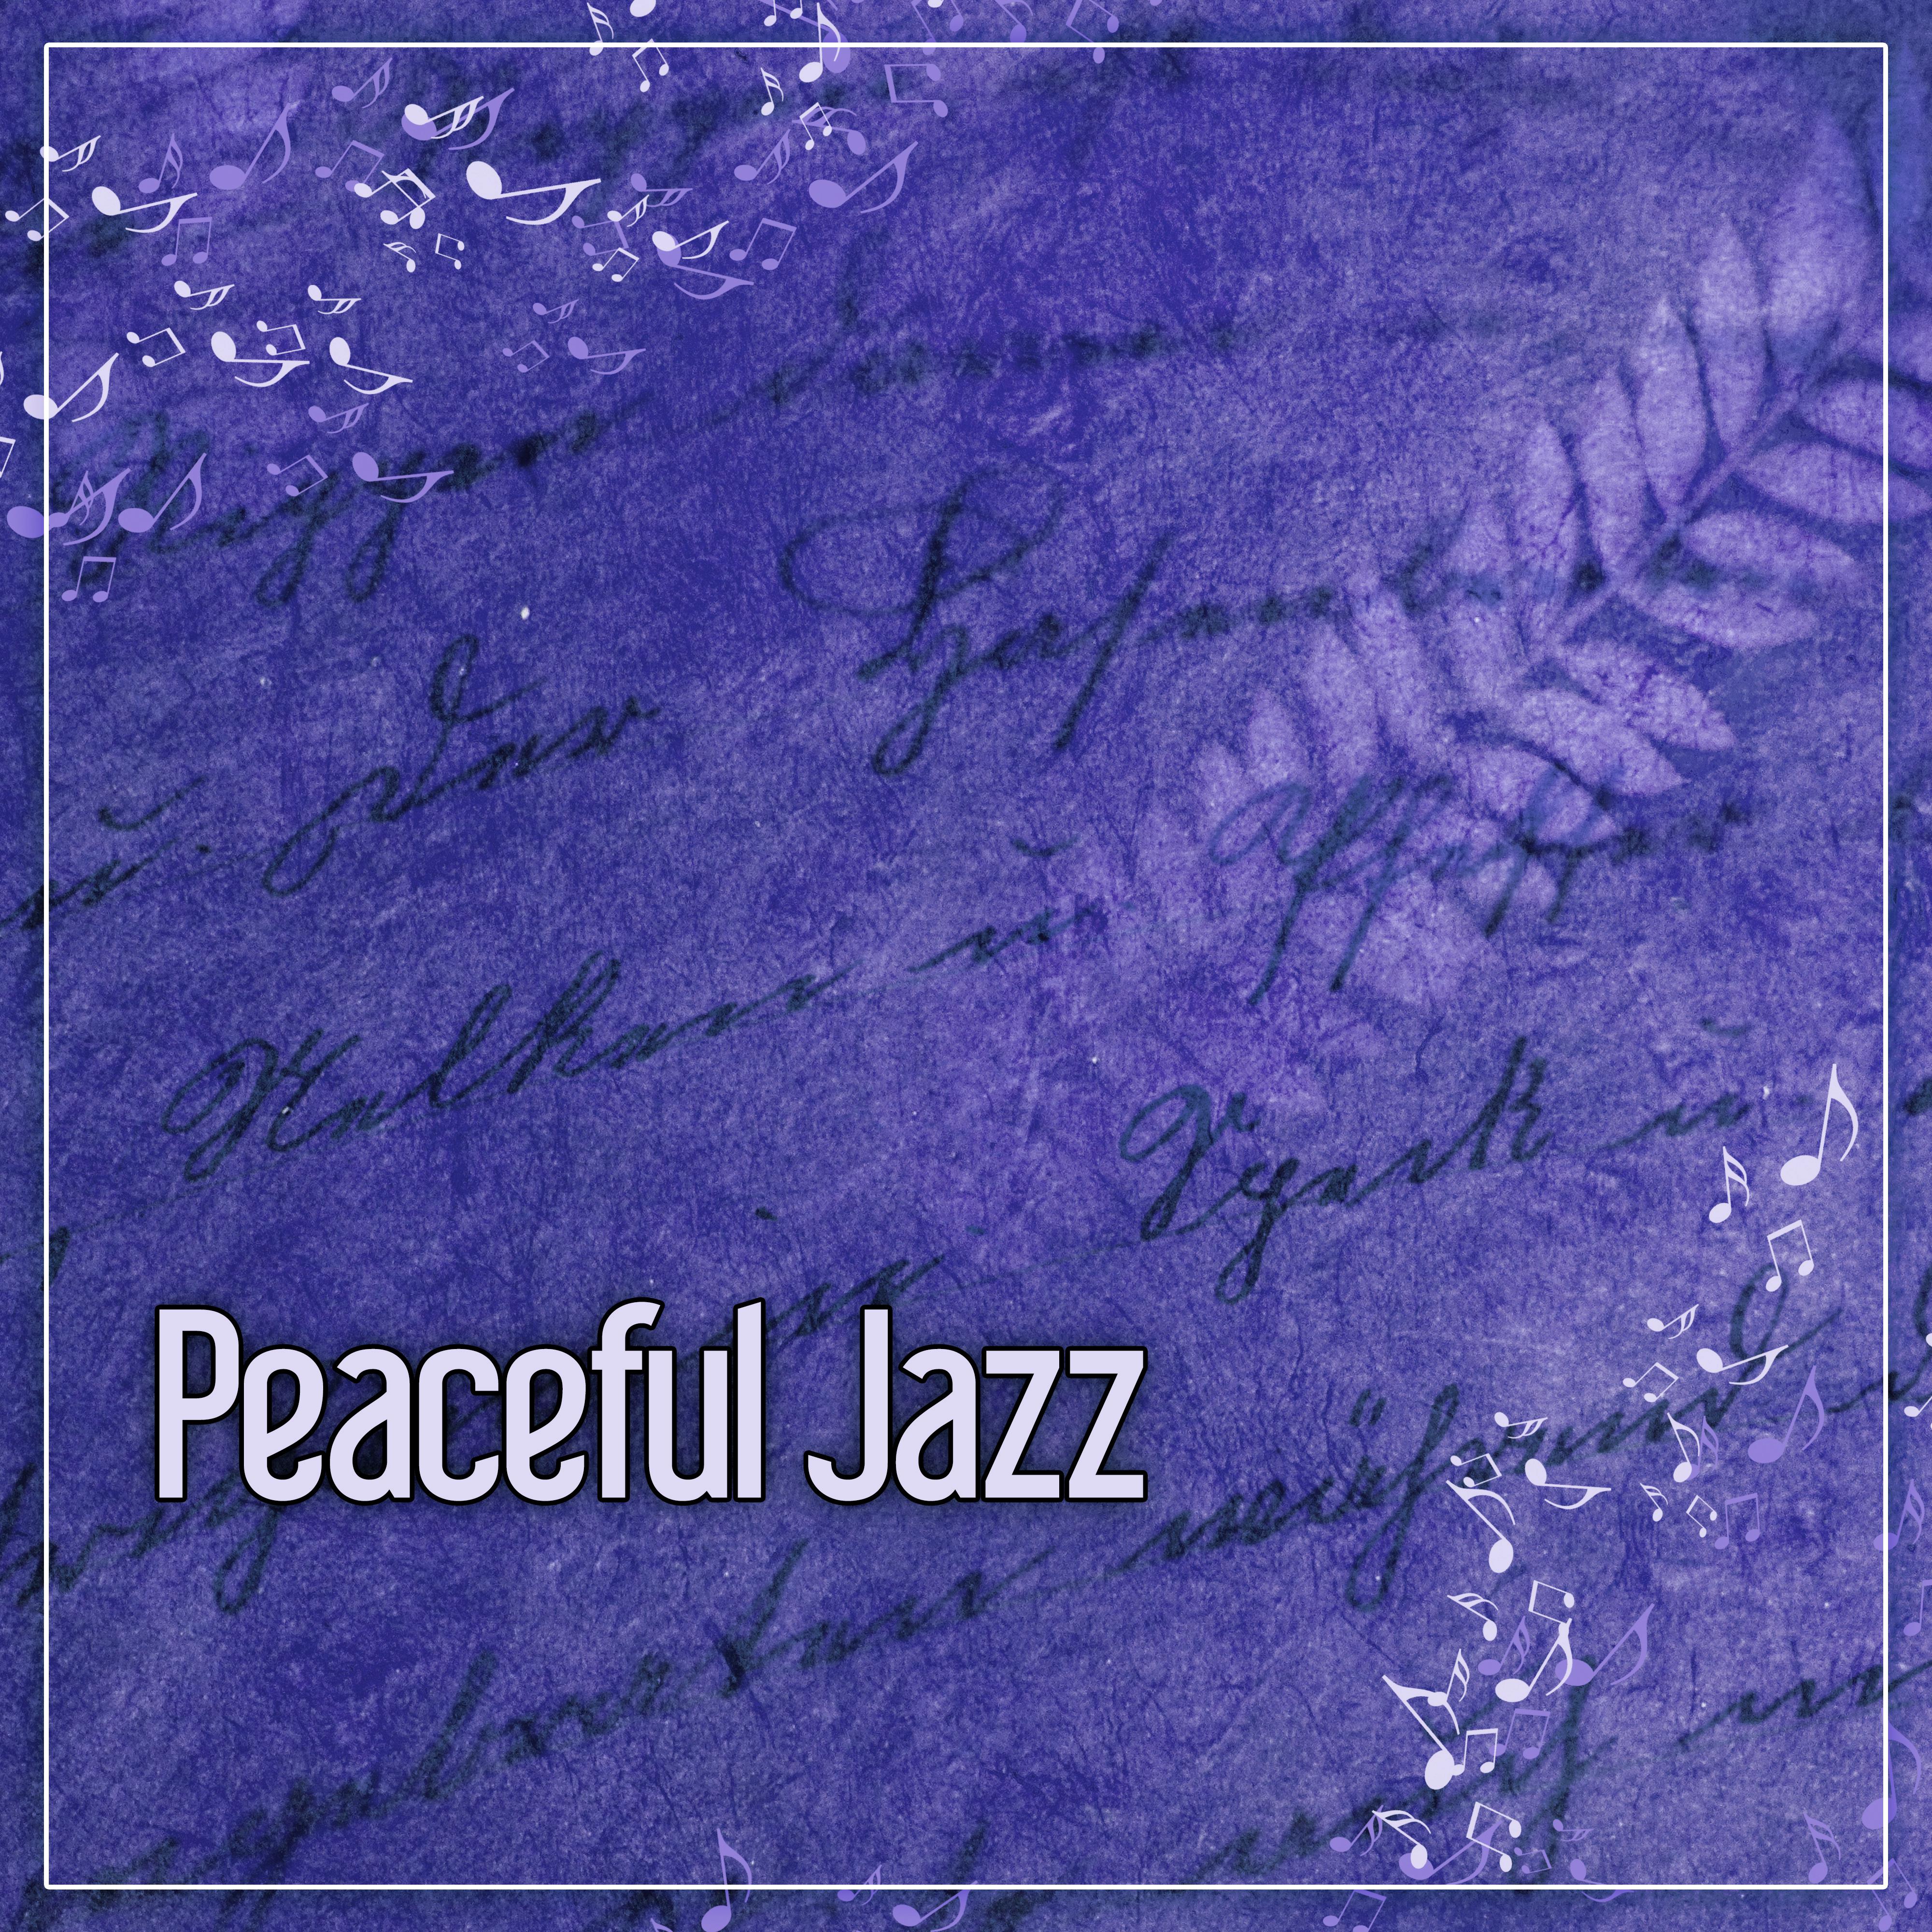 Peaceful Jazz  Soft Piano Jazz, Mellow Sounds for Stress Relief, Background Music to Relax, Beautiful Moments